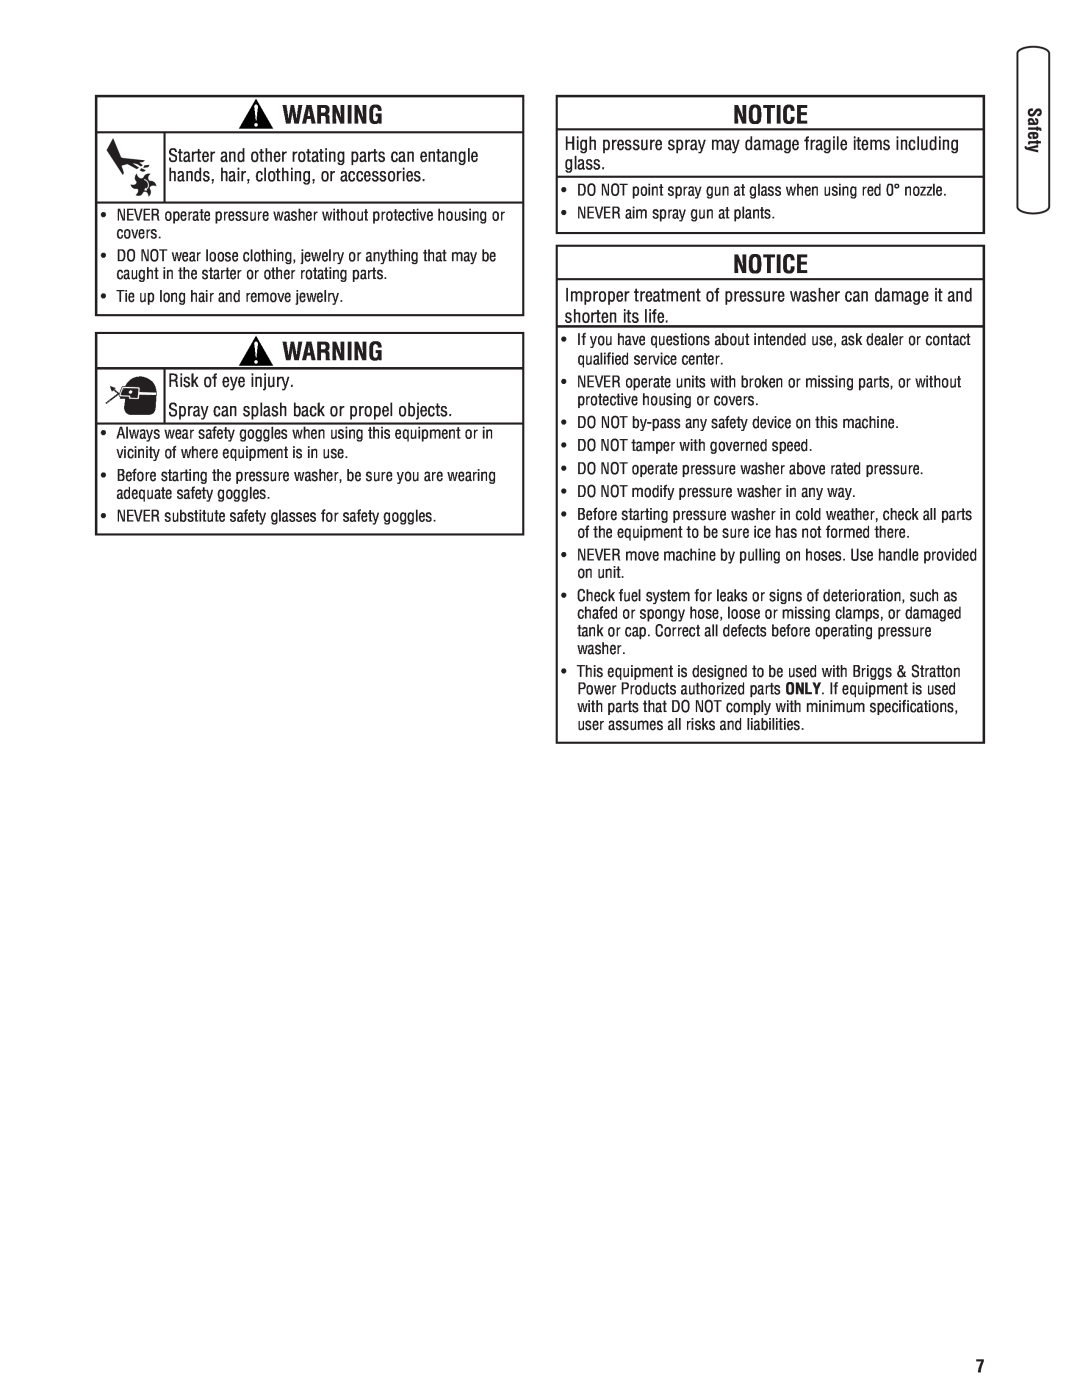 Briggs & Stratton 020364-0 manual Notice, Risk of eye injury, Spray can splash back or propel objects 